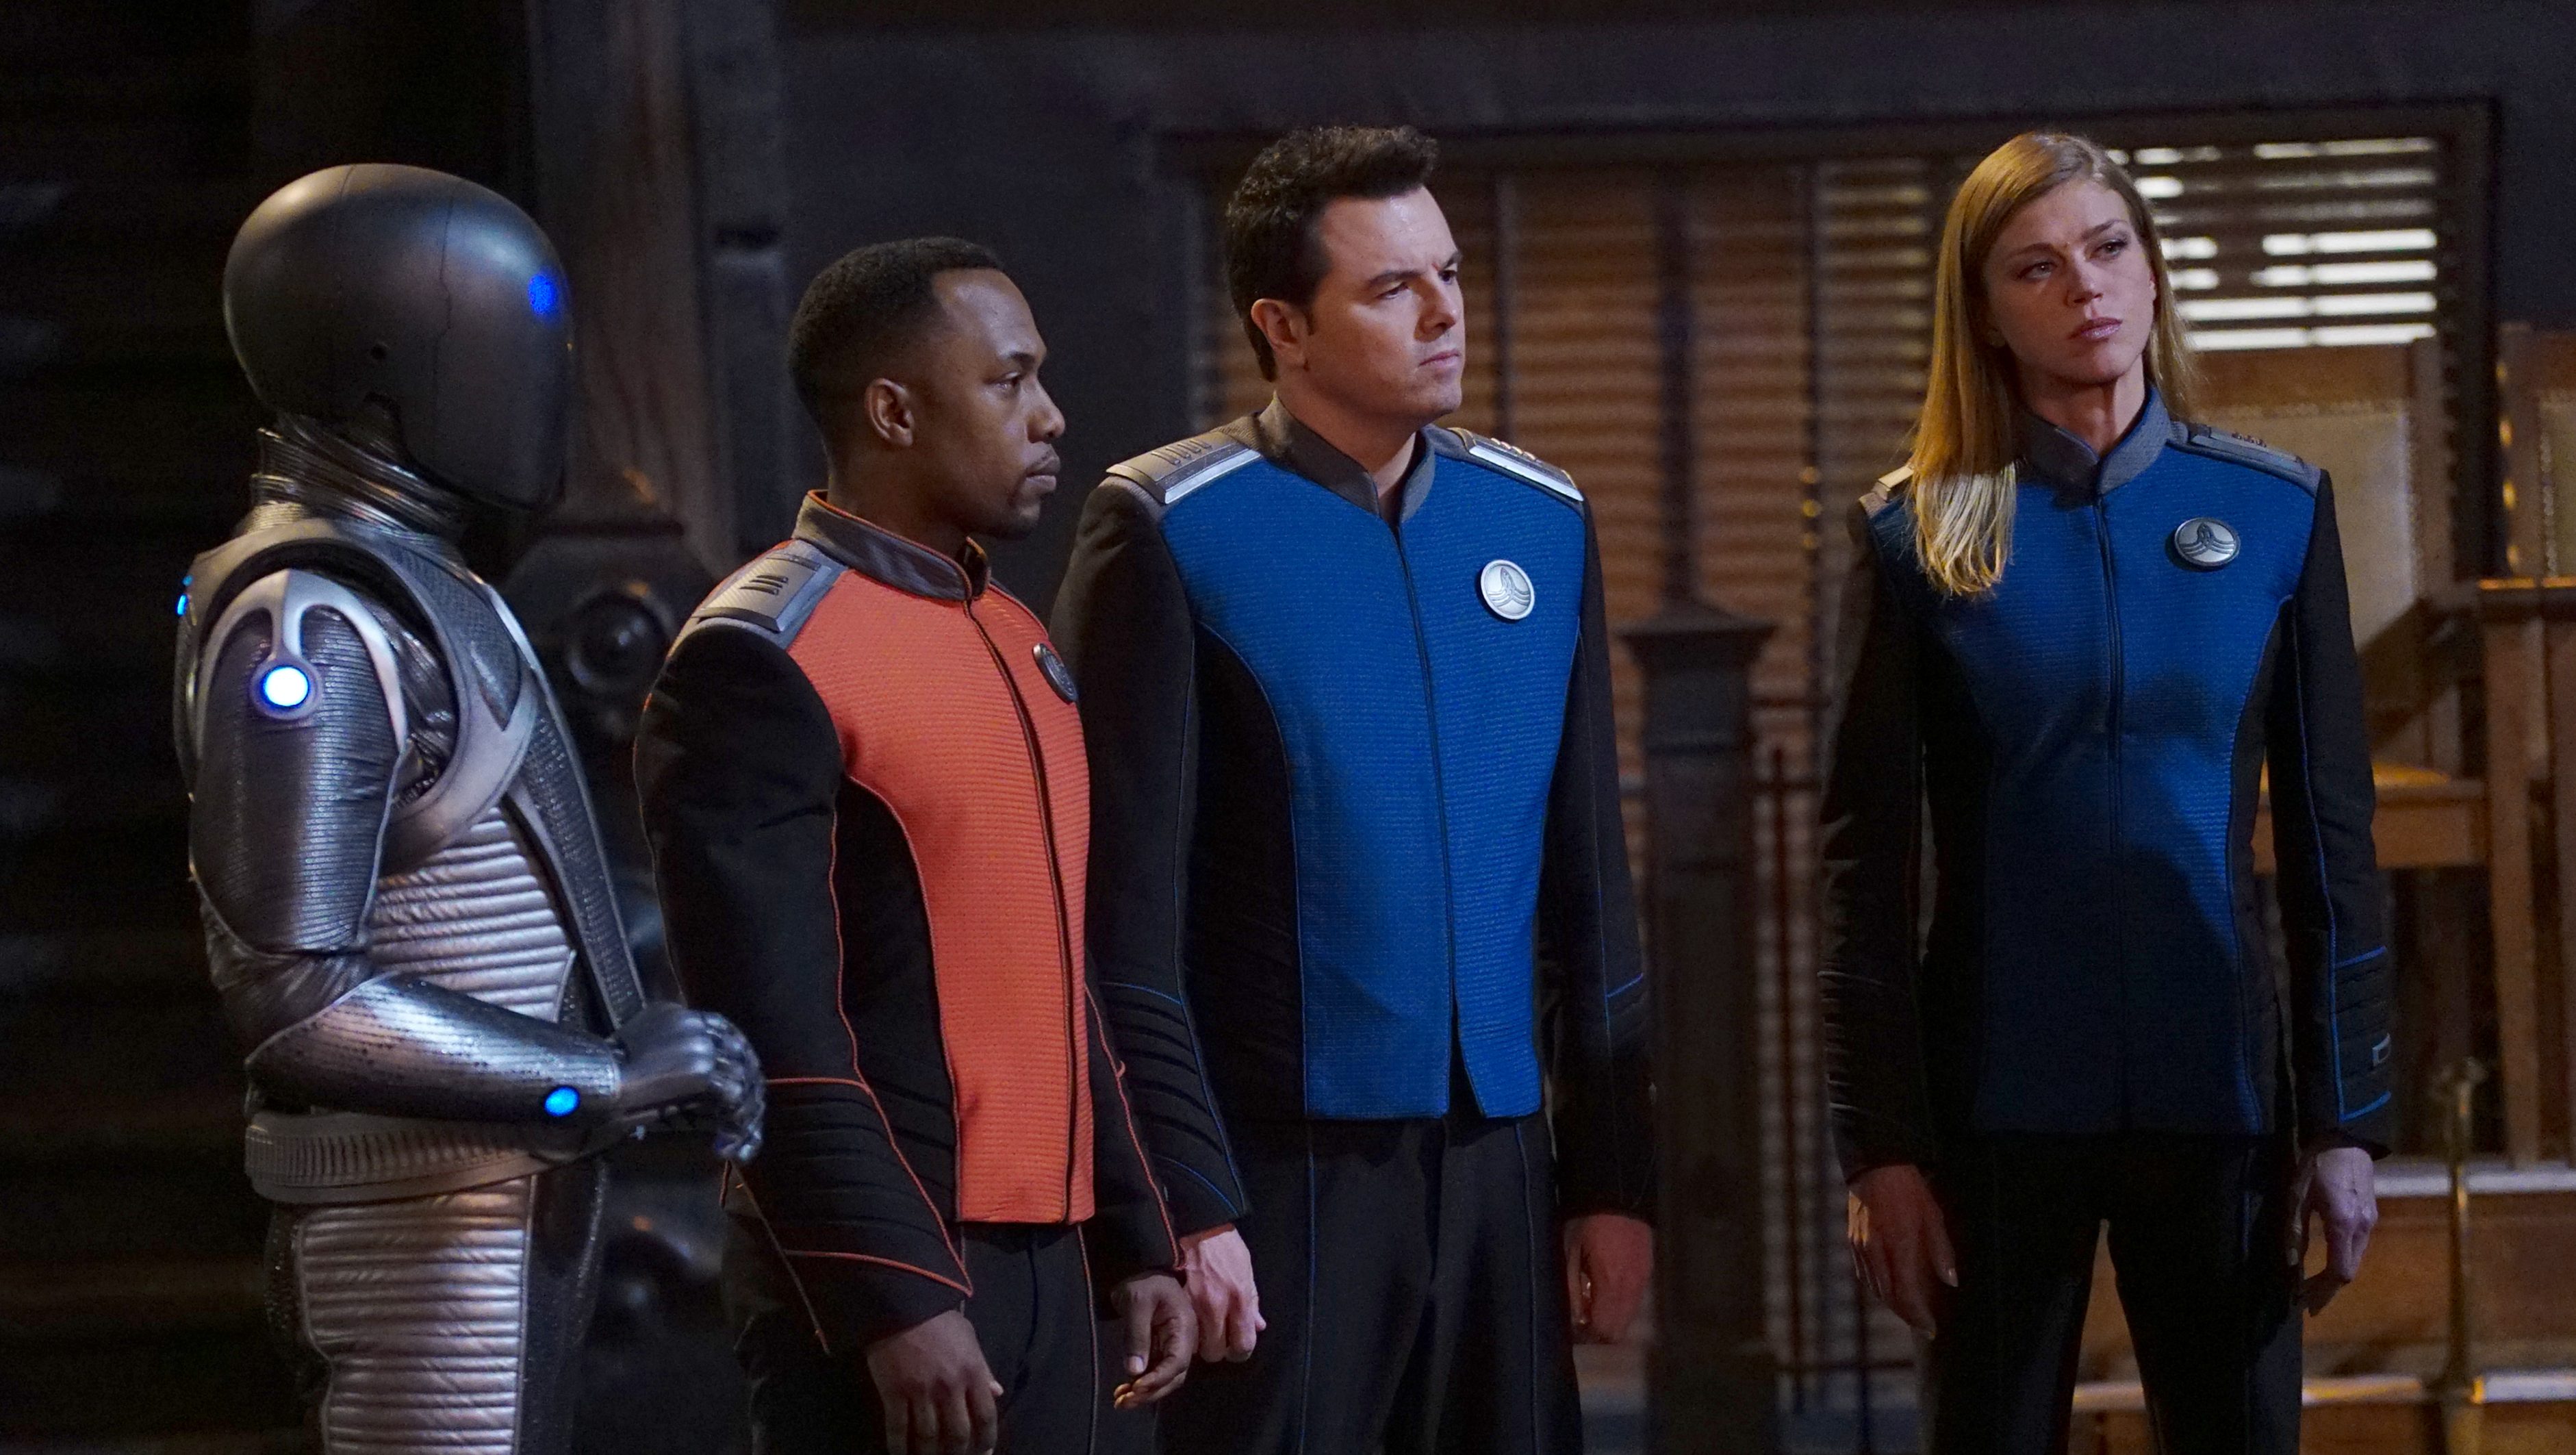 The Orville S02e07 Cast Special Guests On Deflector